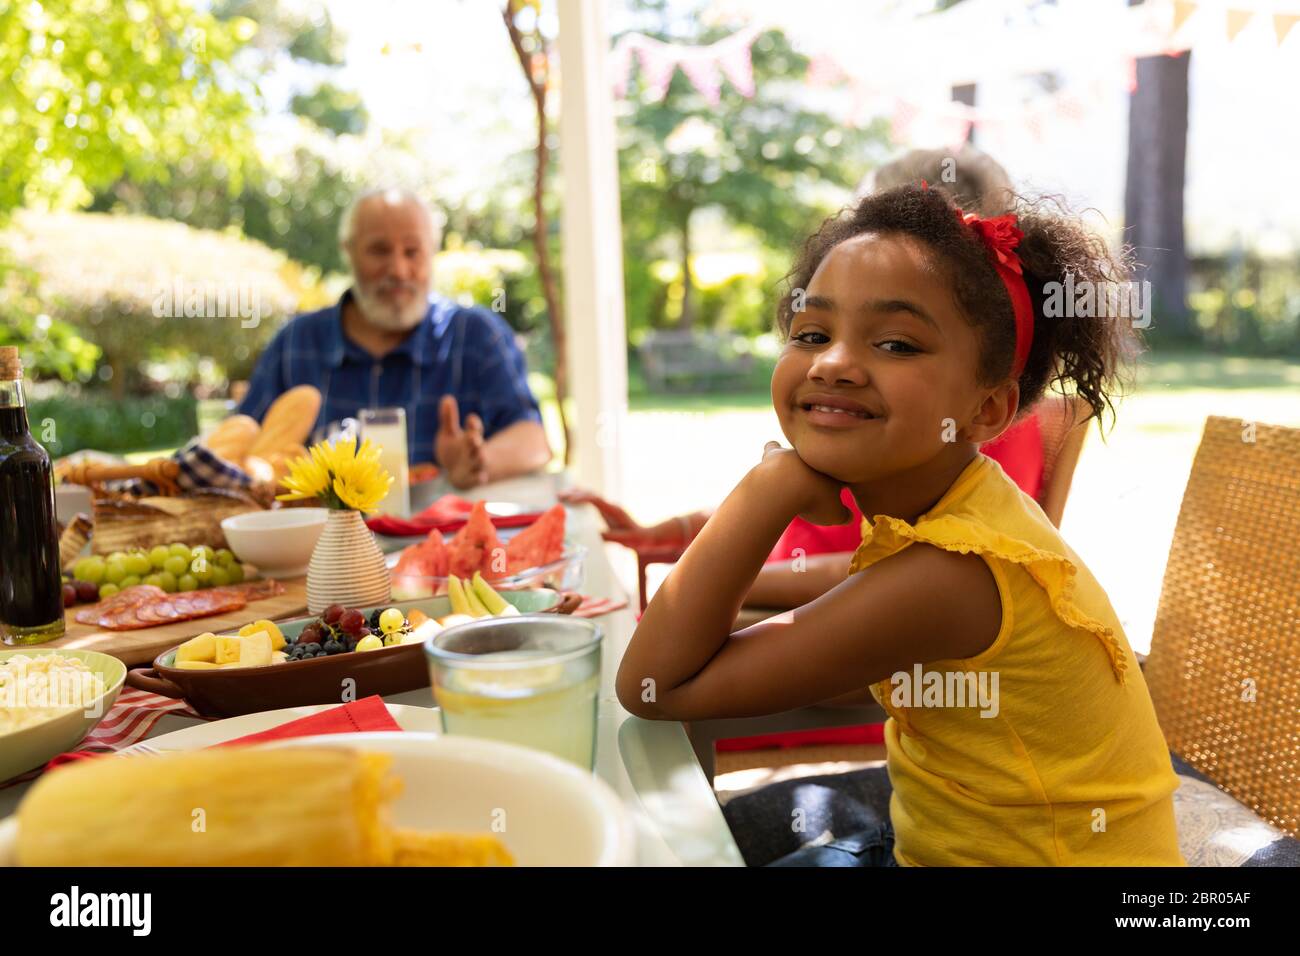 Little girl looking at camera and smiling Stock Photo